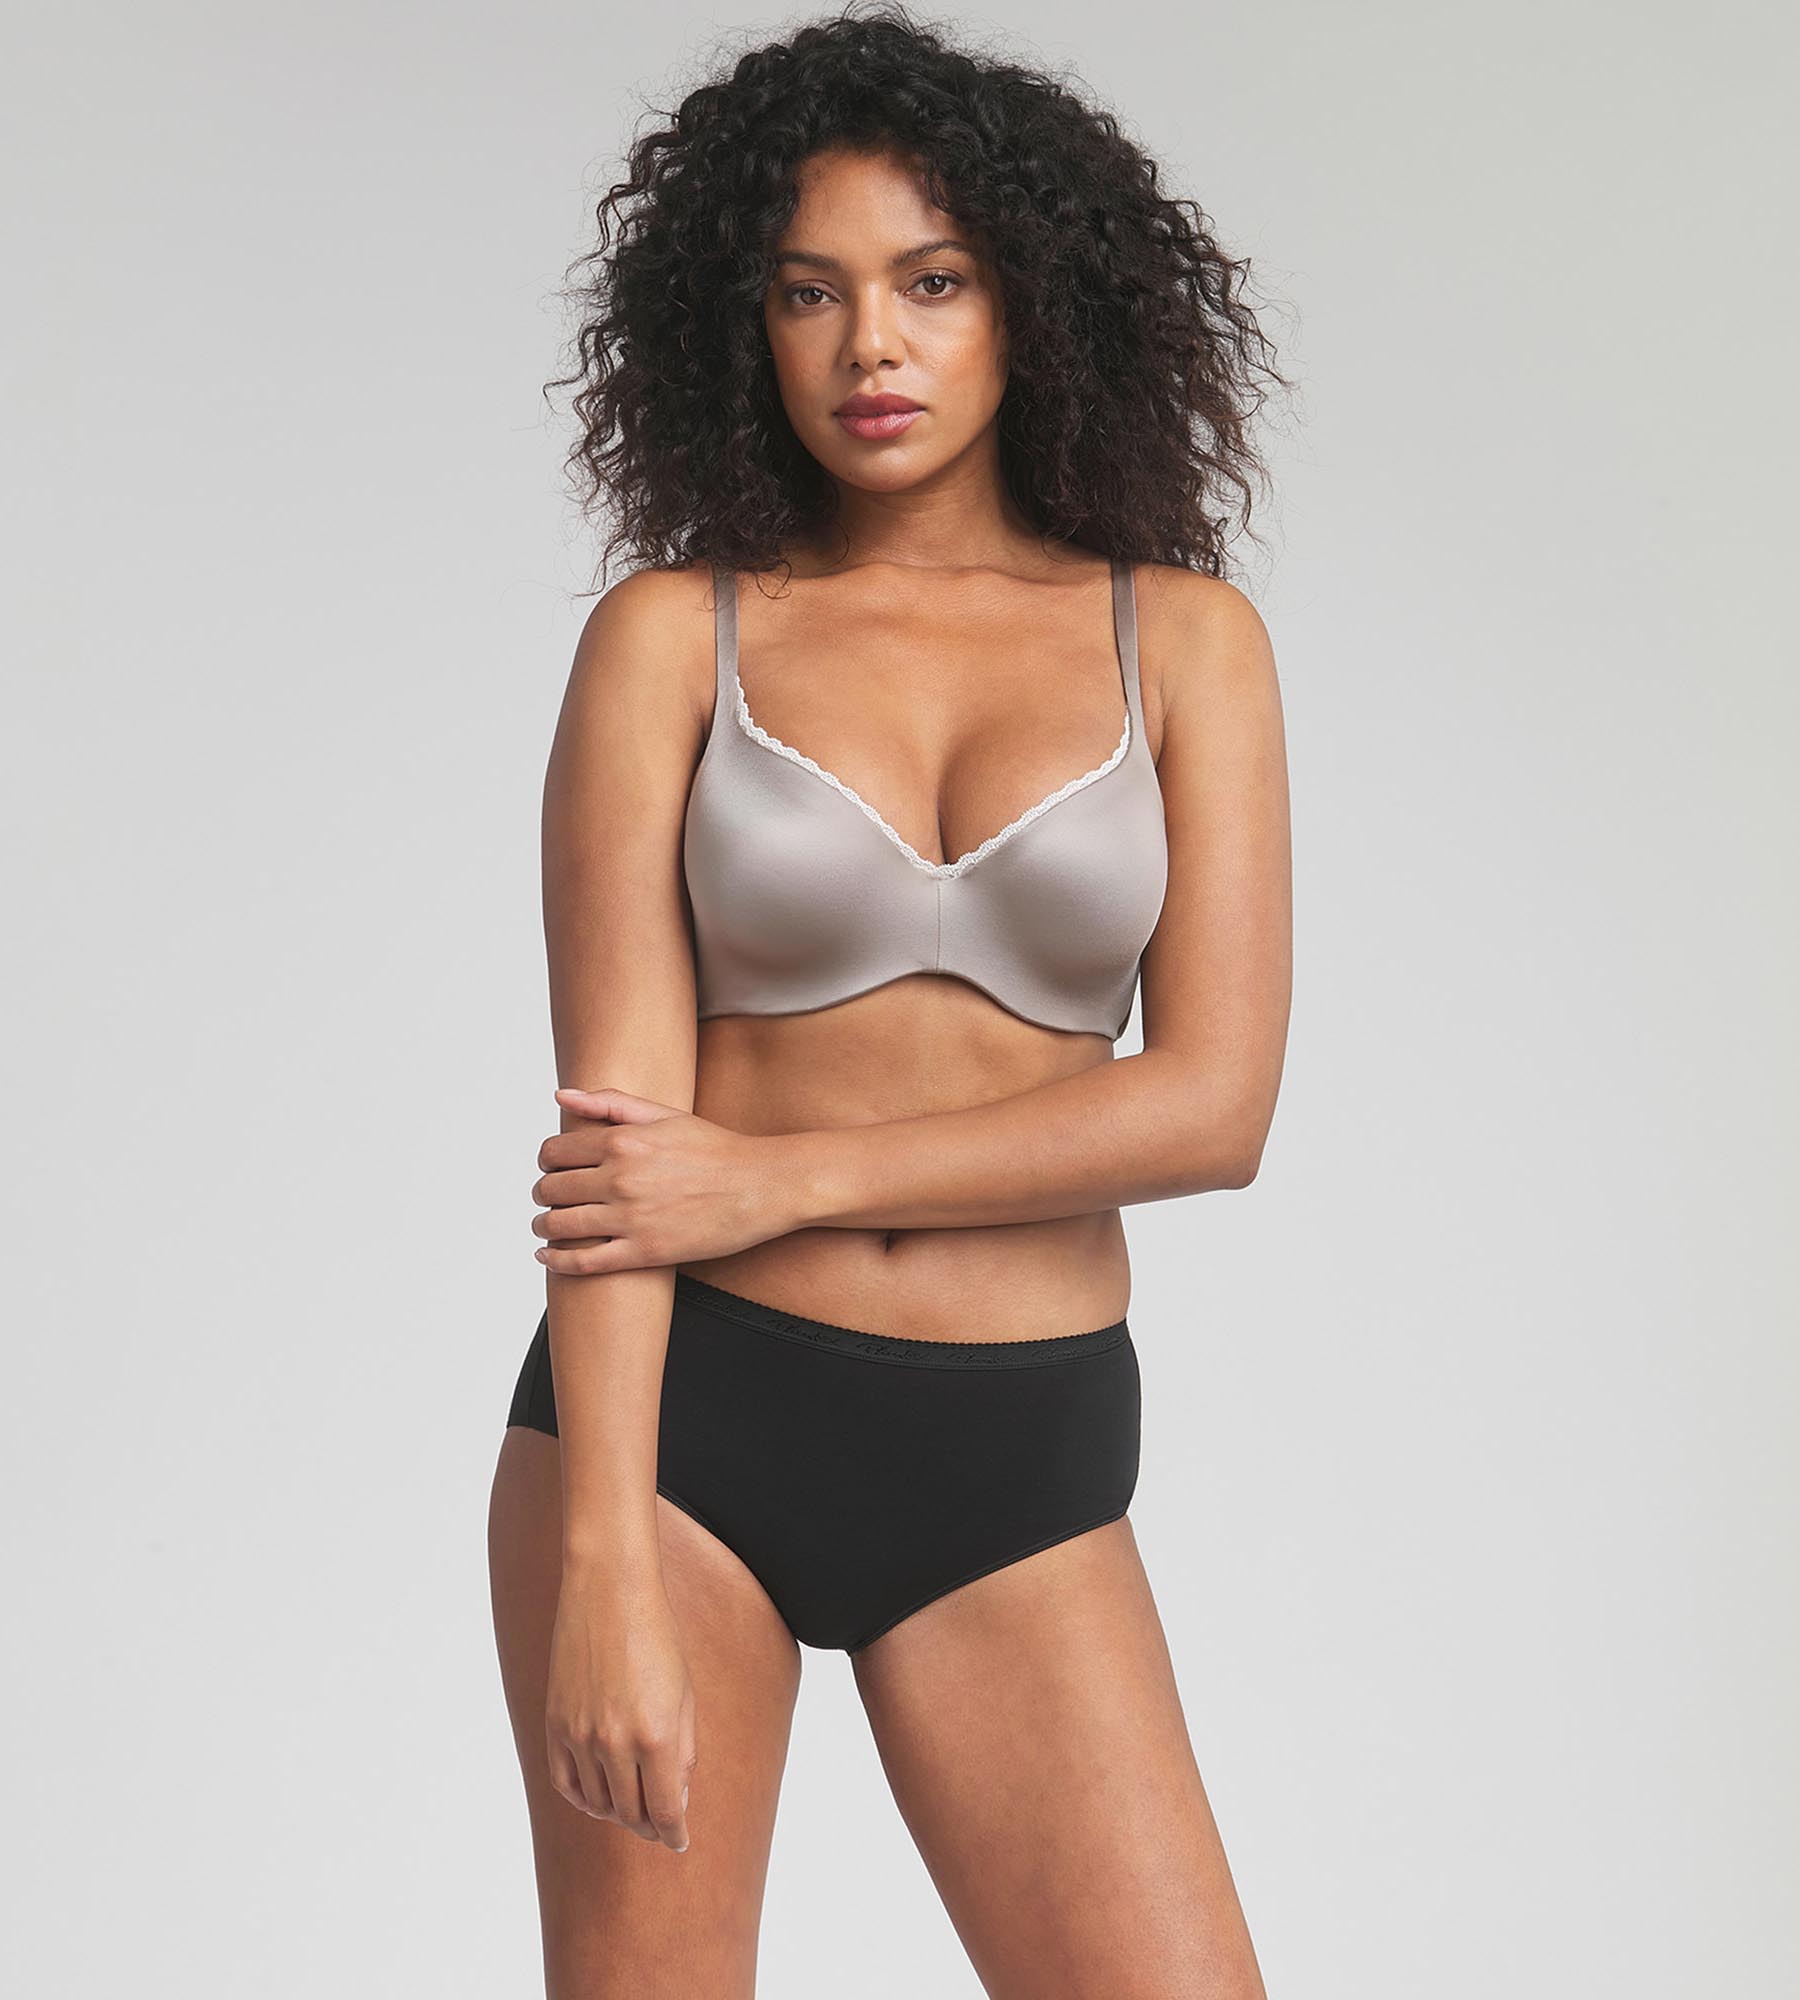 Soutien-gorge aux armatures amovibles taupe 24h Soft Absolu , , PLAYTEX